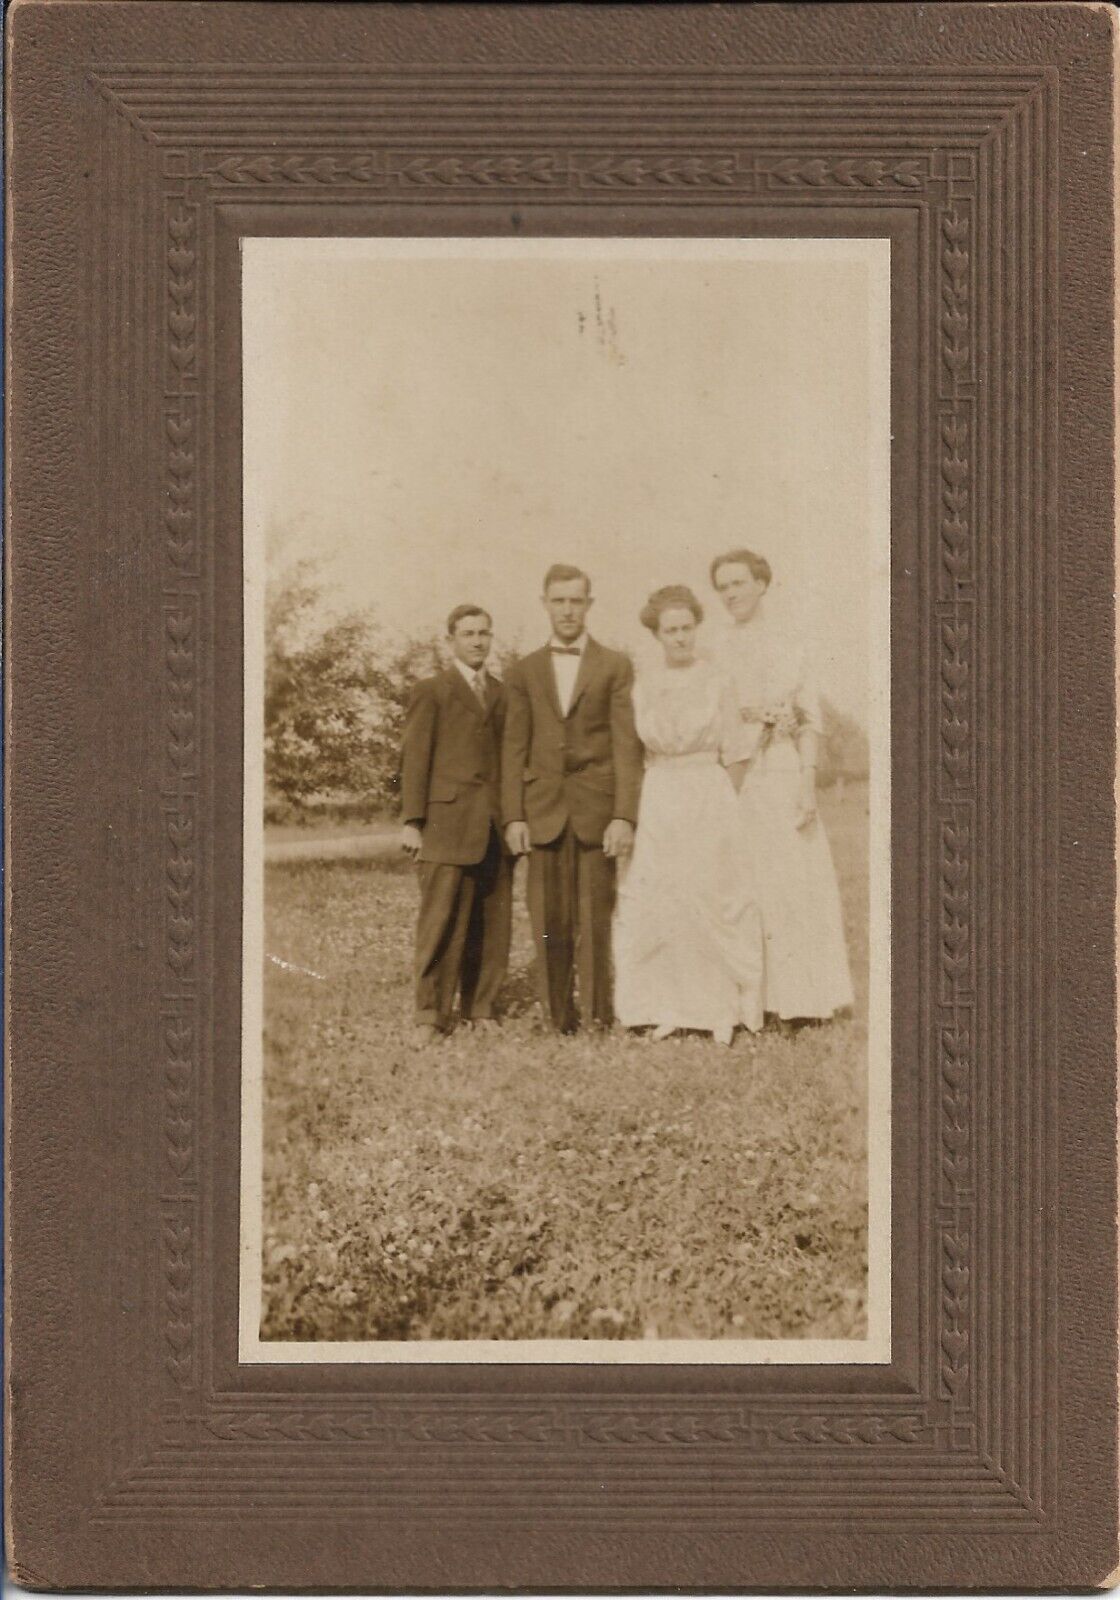 Group Outdoors Wedding Photograph Ladies Man Early 1900s Vintage Cabinet Card